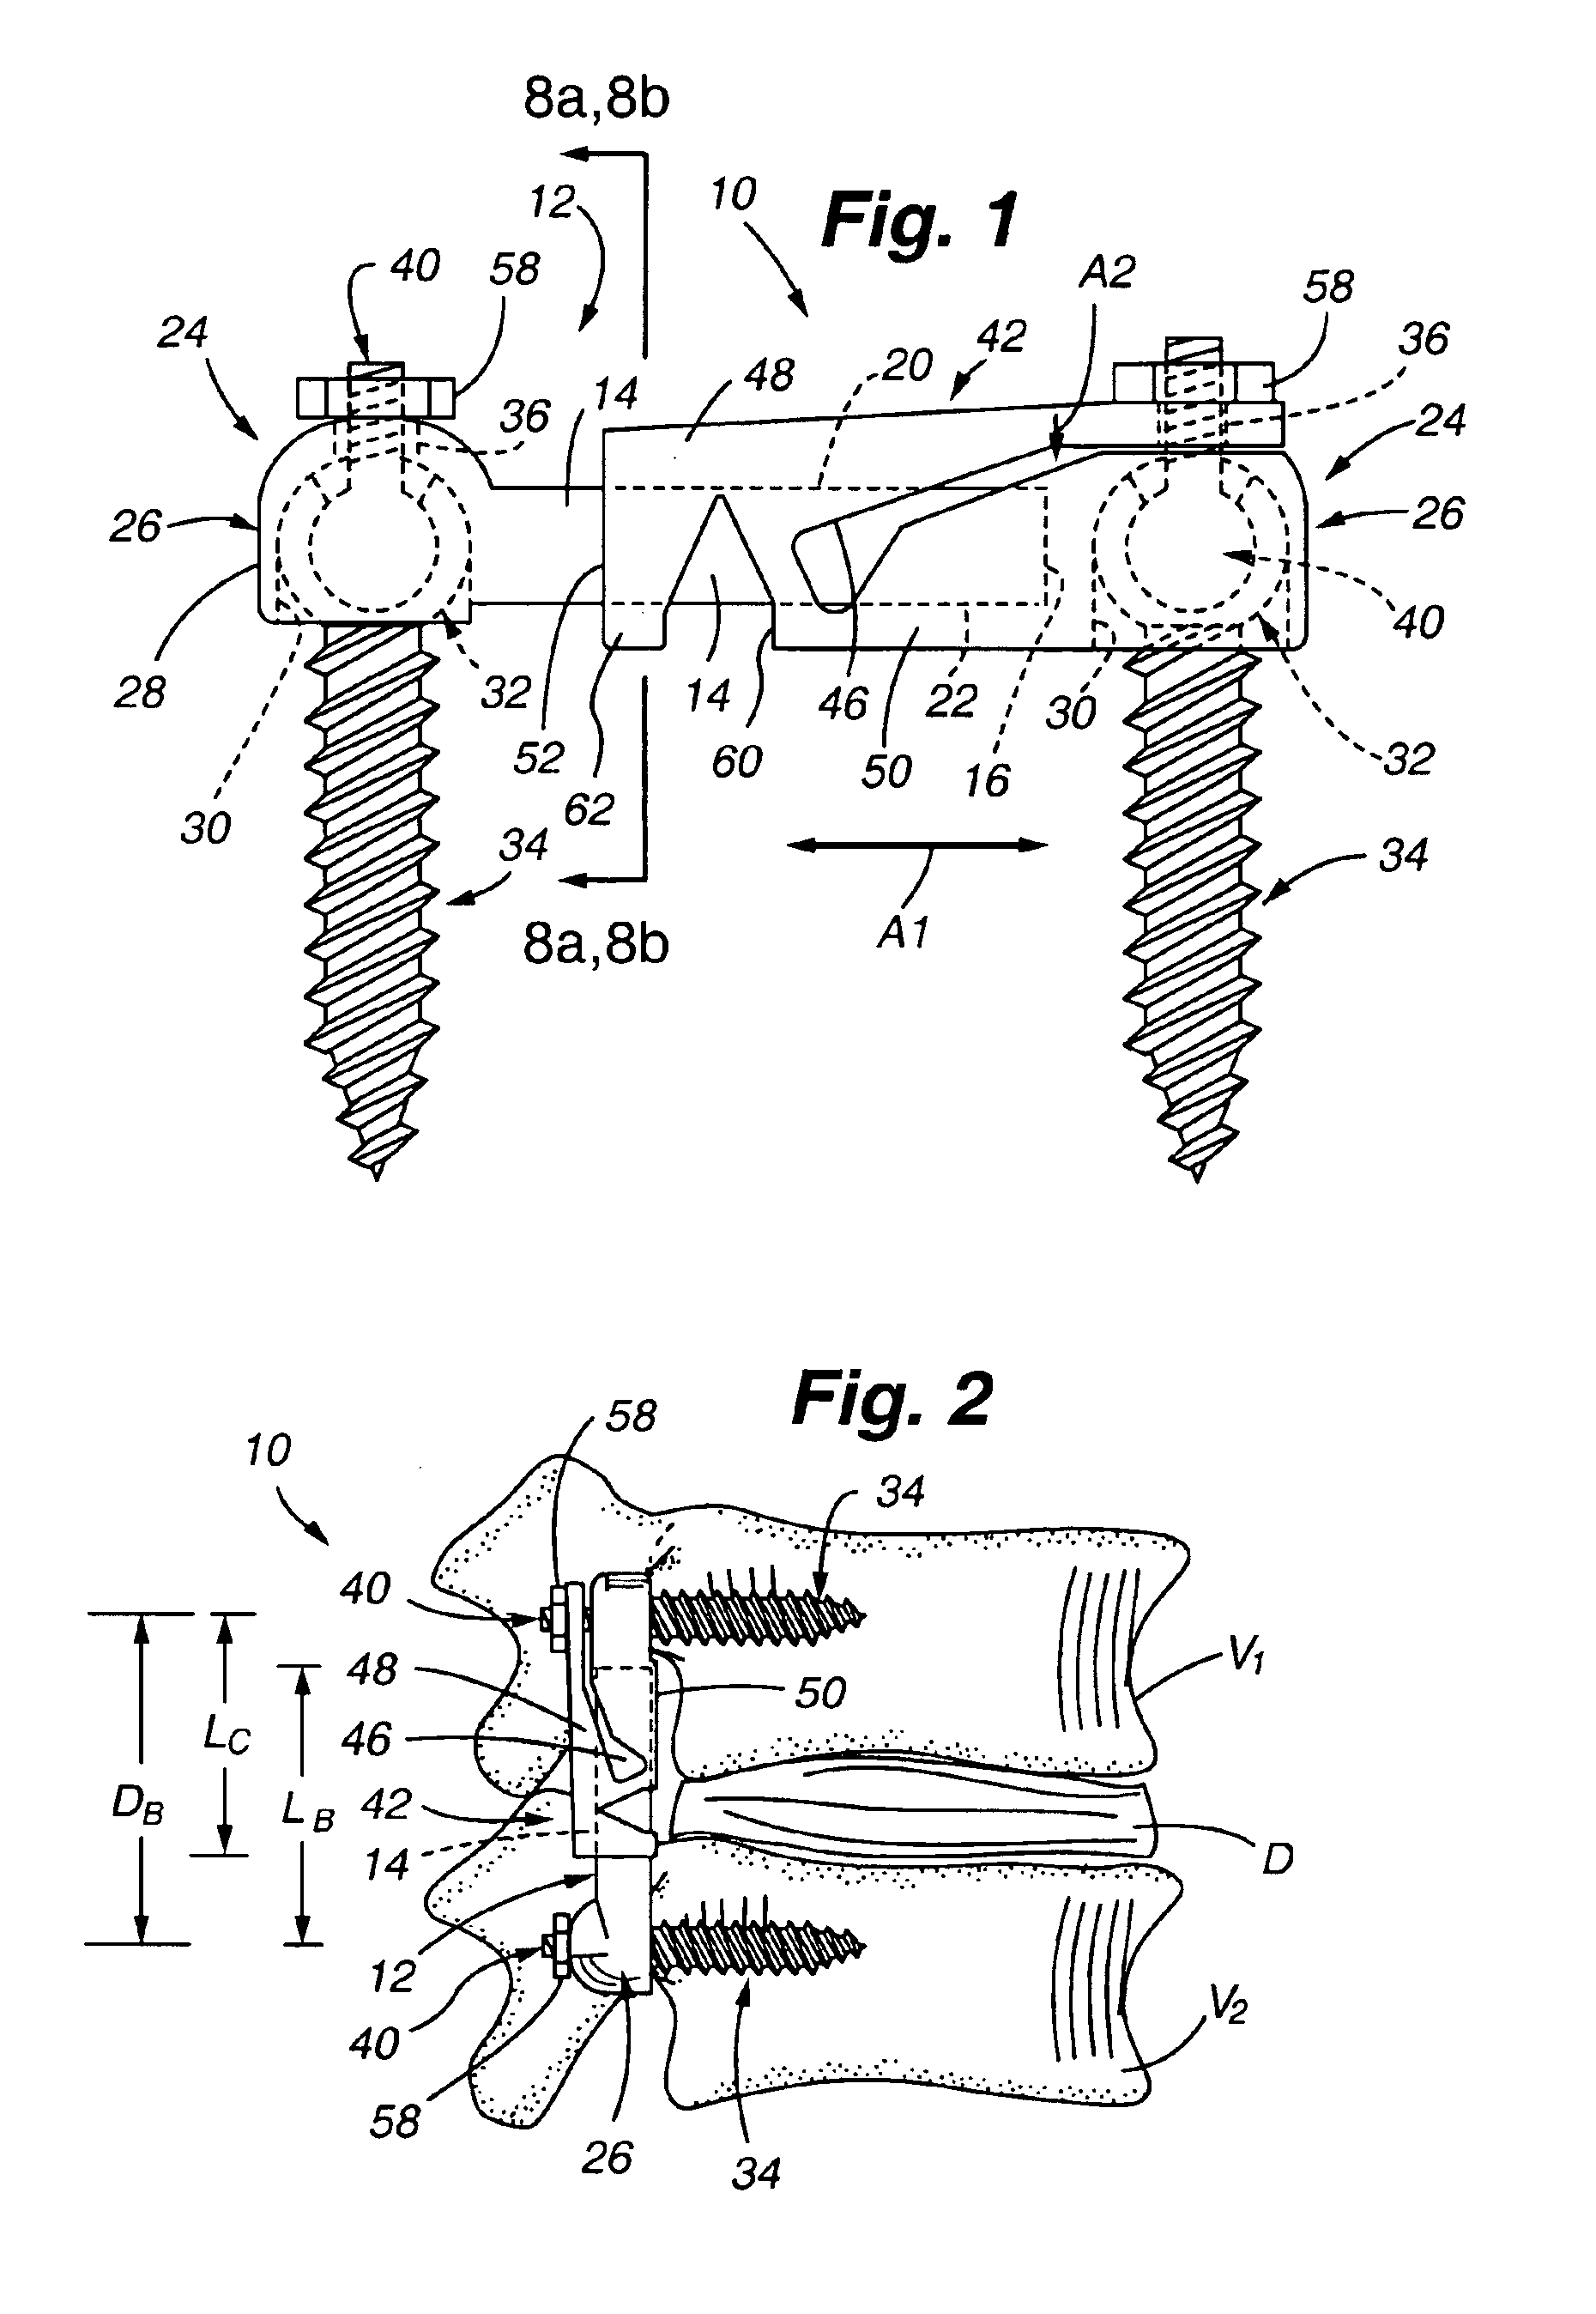 Adjustable rod and connector device and method of use